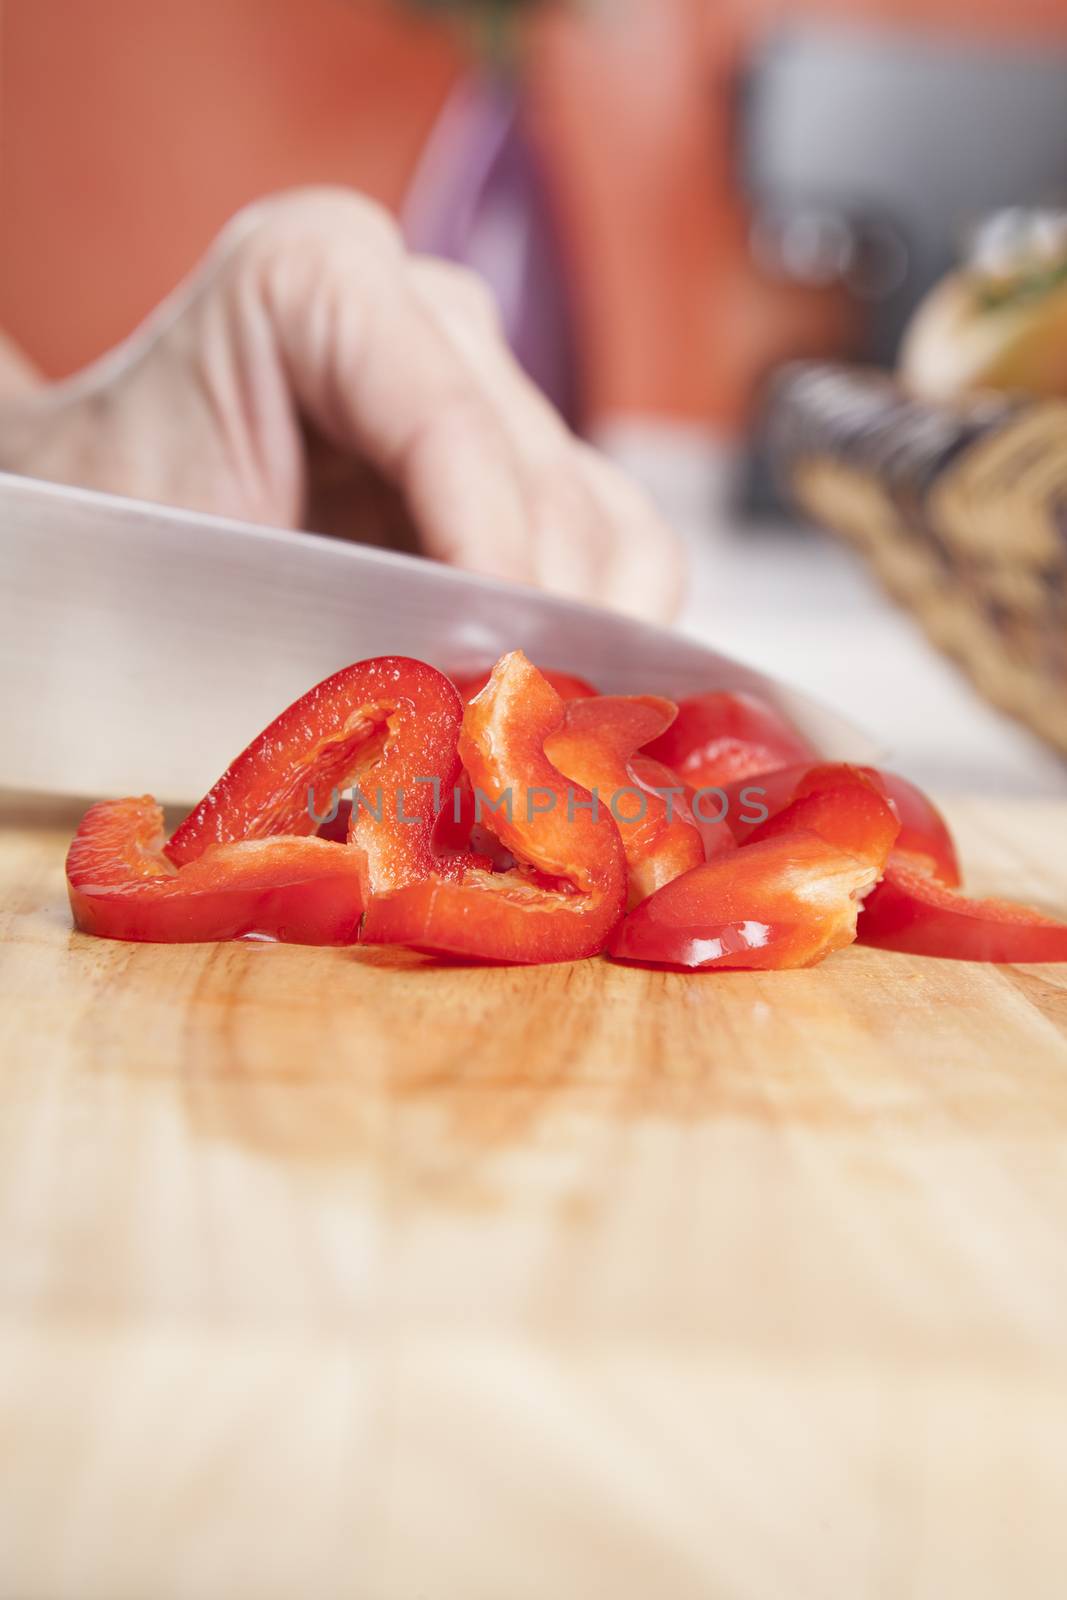 chopping red pepper by quintanilla